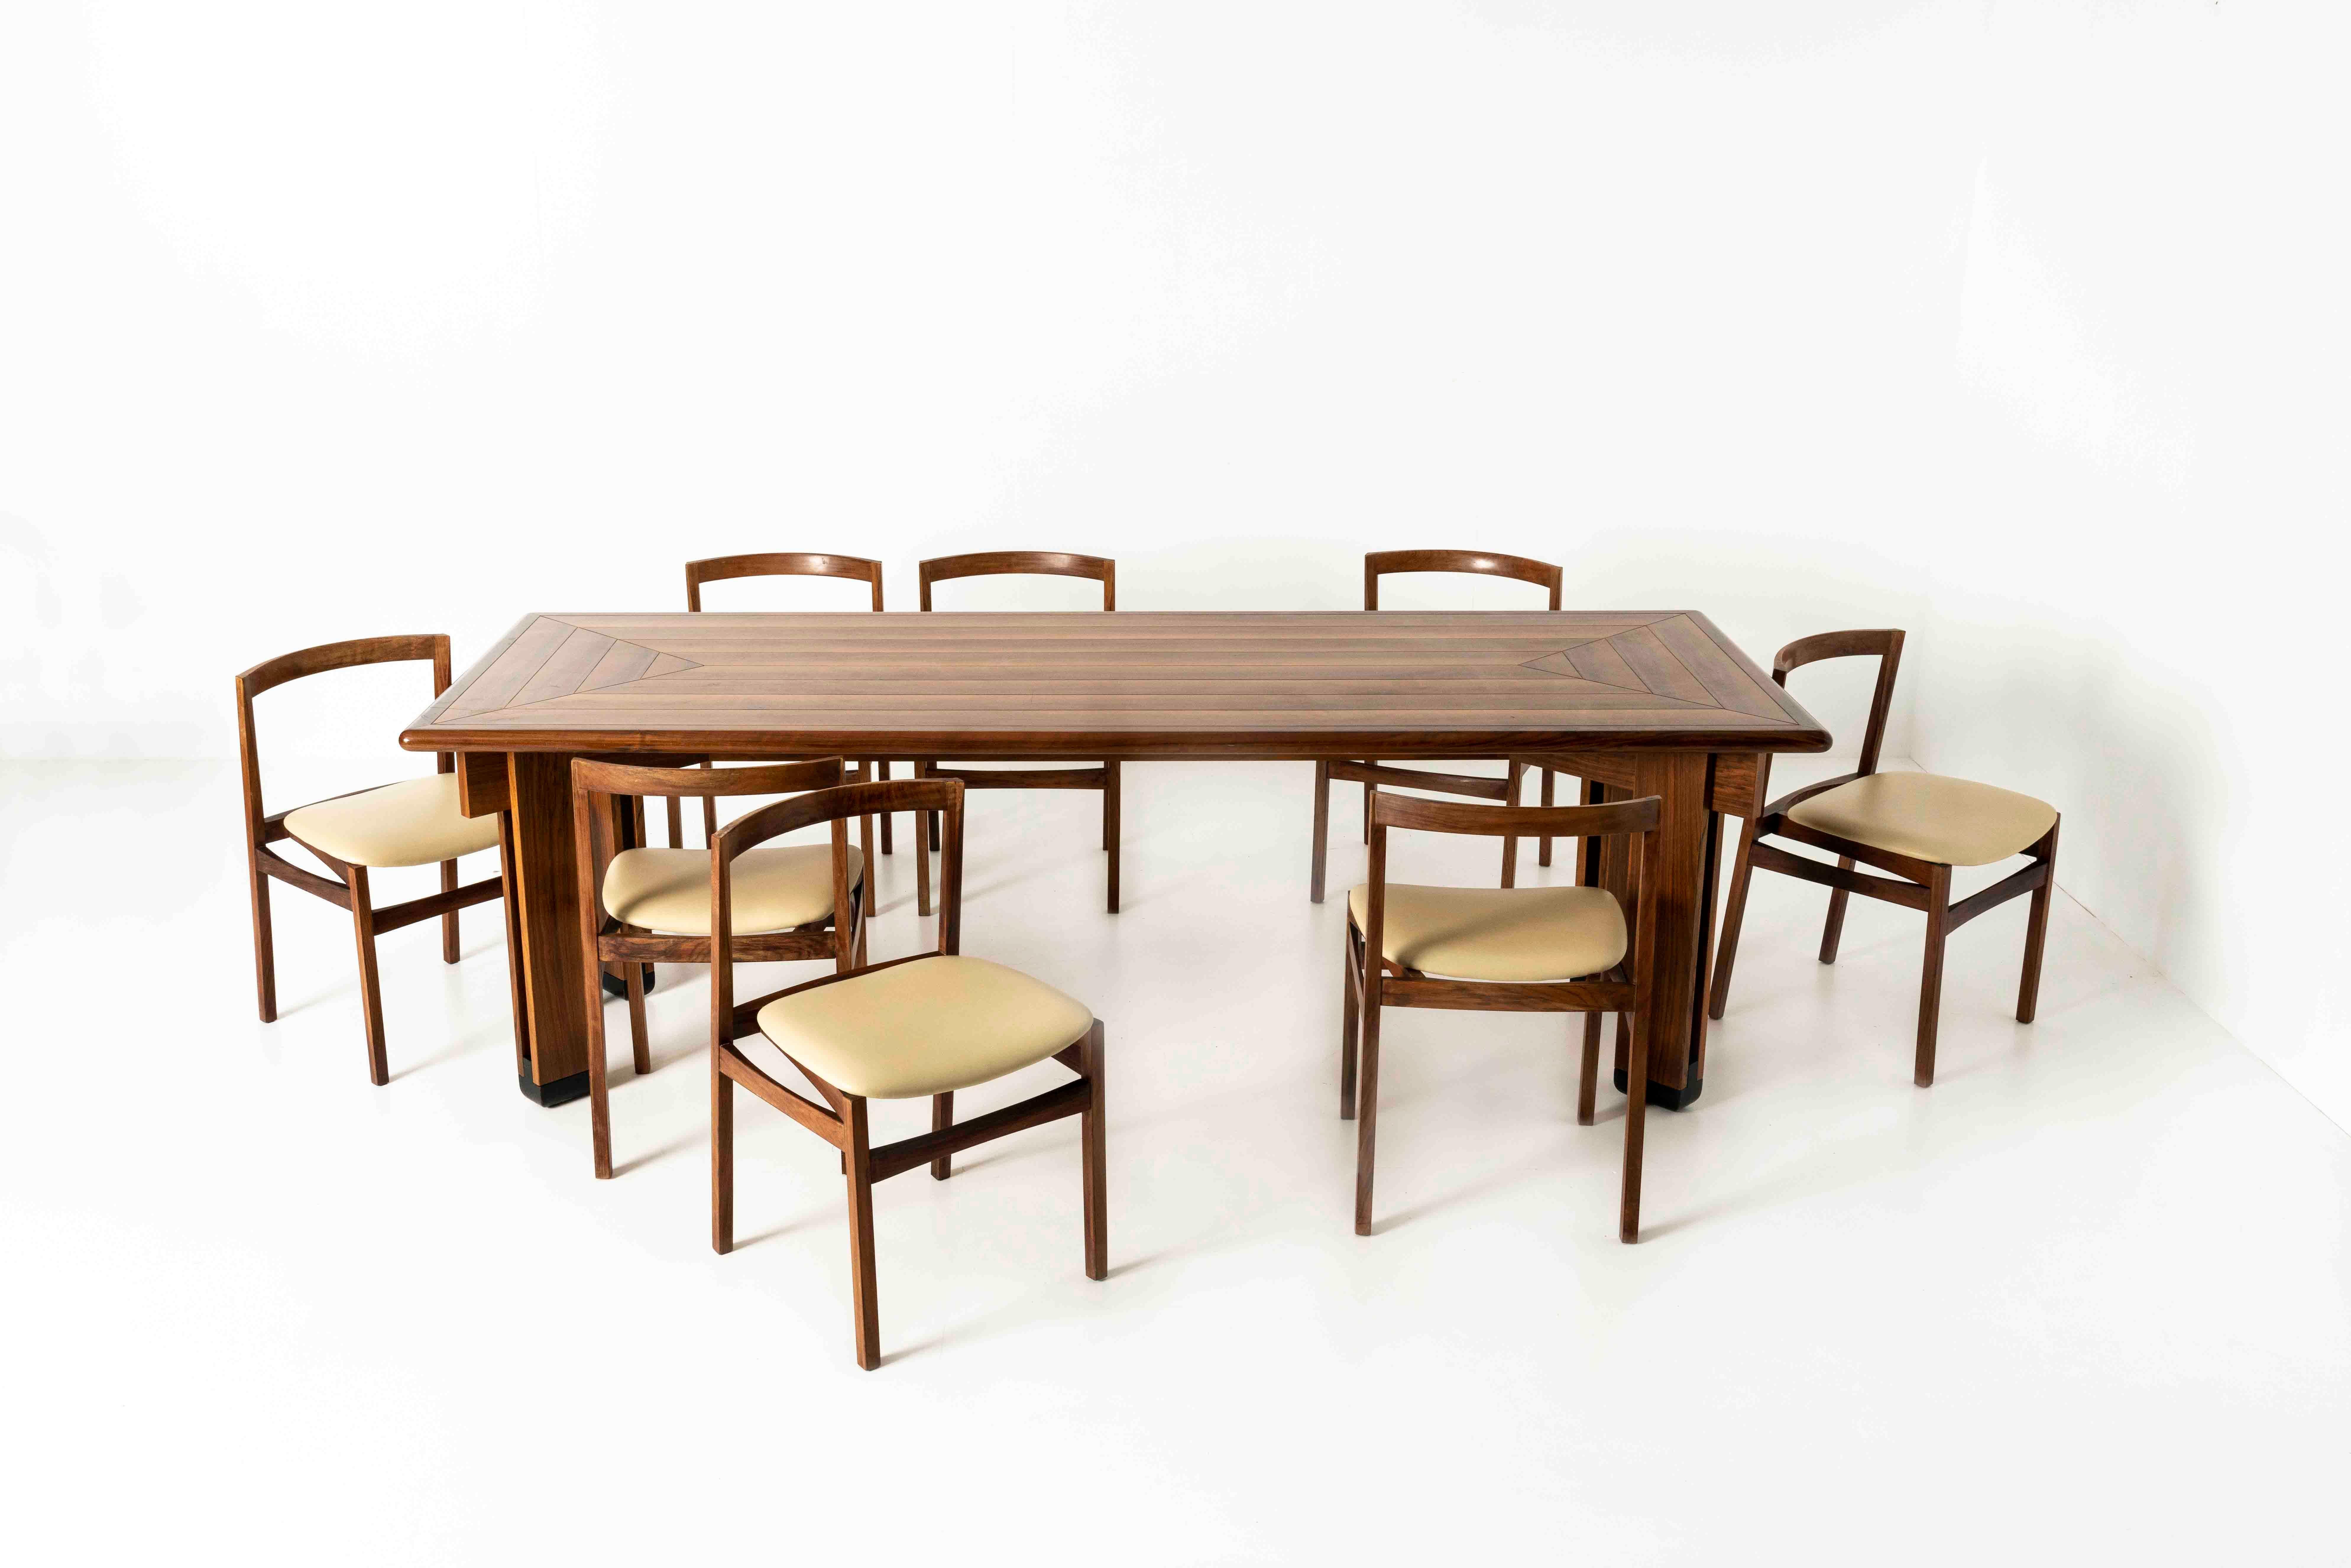 Italian Dining Table by Ico Parisi for Brugnoli Mobili Cantù, Italy, 1950s For Sale